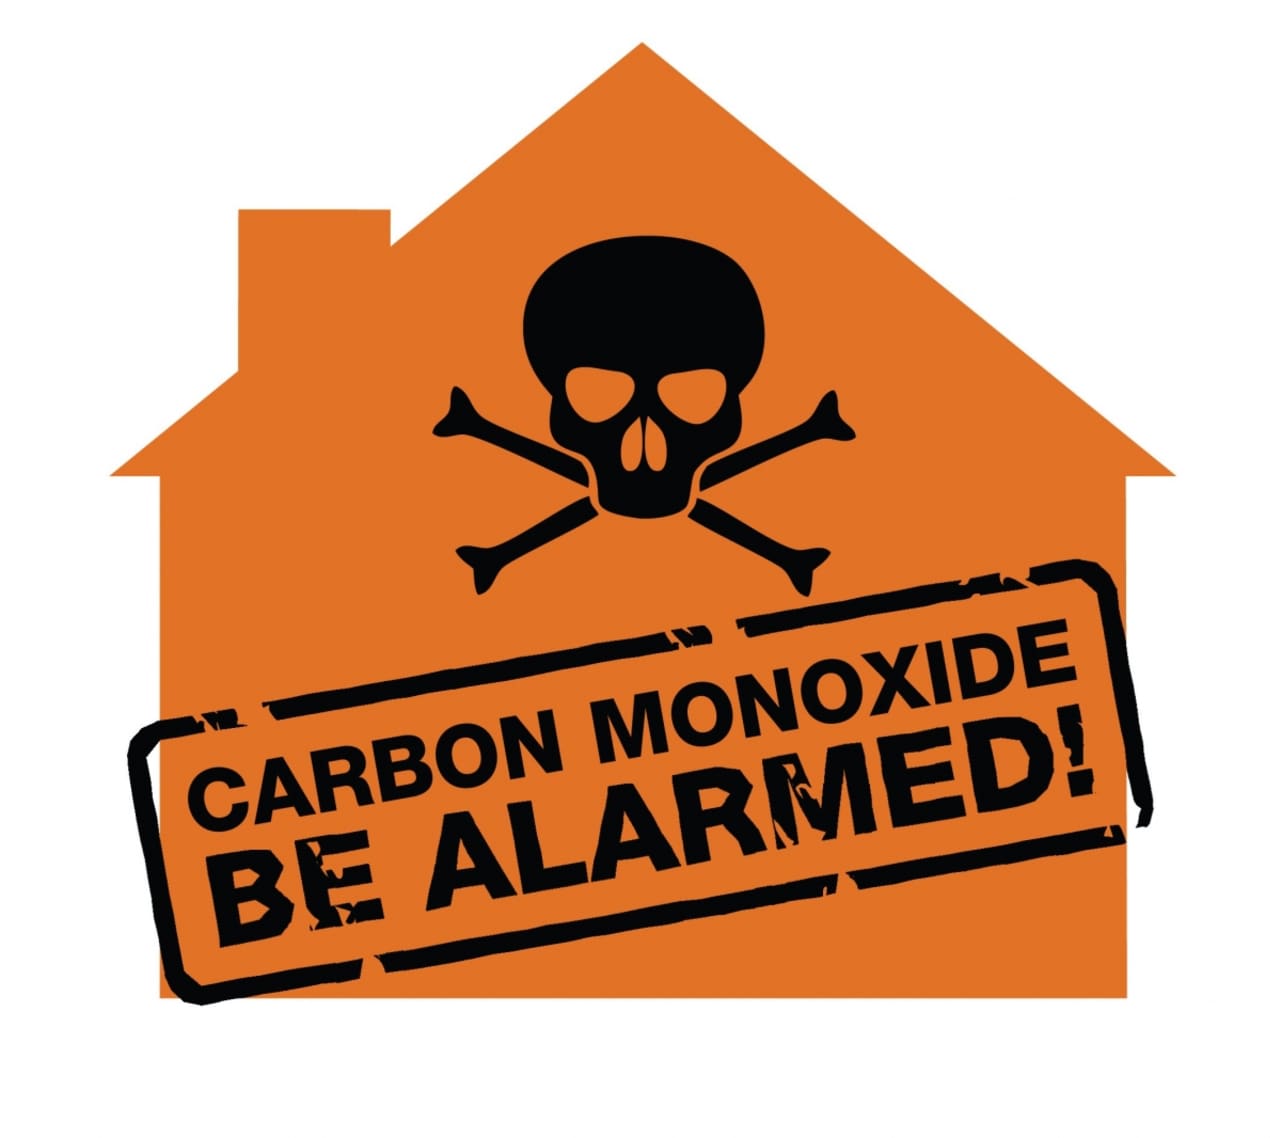 Fourteen people staying at a local residence were hospitalized after a carbon monoxide alarm was triggered on Saturday.